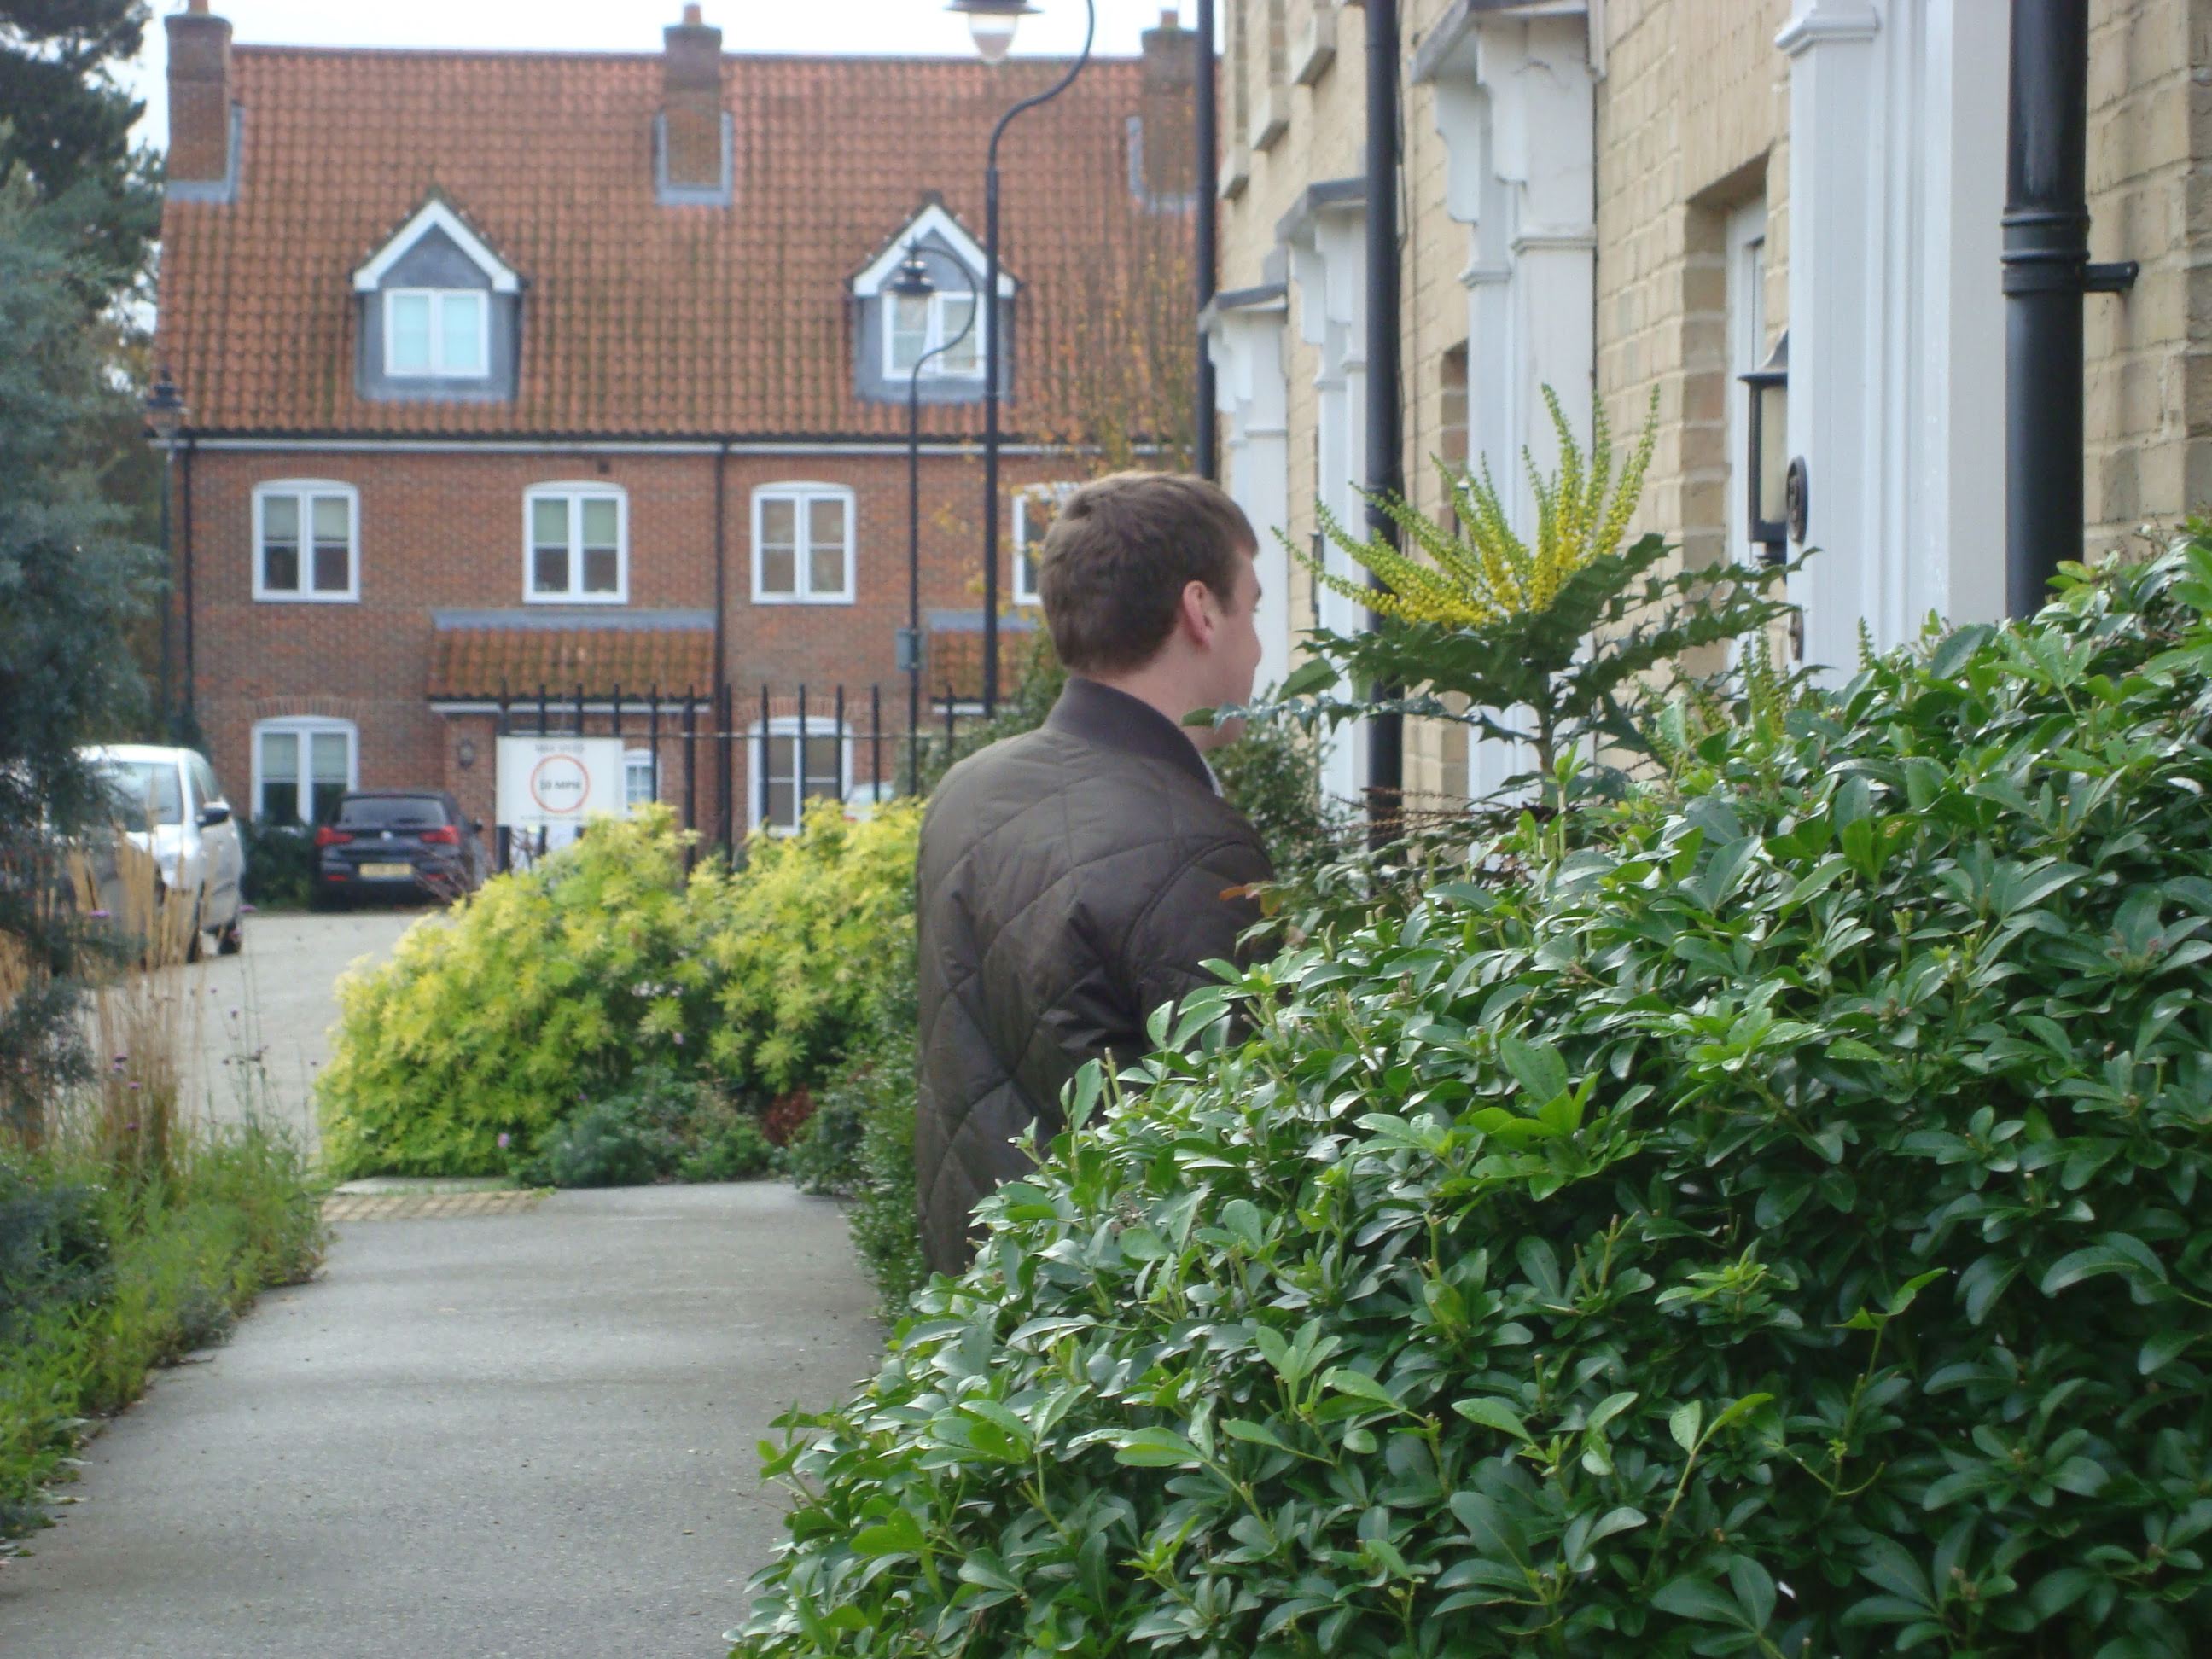 As you might have expected, as the Prospective Parliamentary candidate for the Conservative Party I’ve spent much of the past month knocking on doors and talking to Ipswich residents ahead of the local elections that took place on the 2nd May.